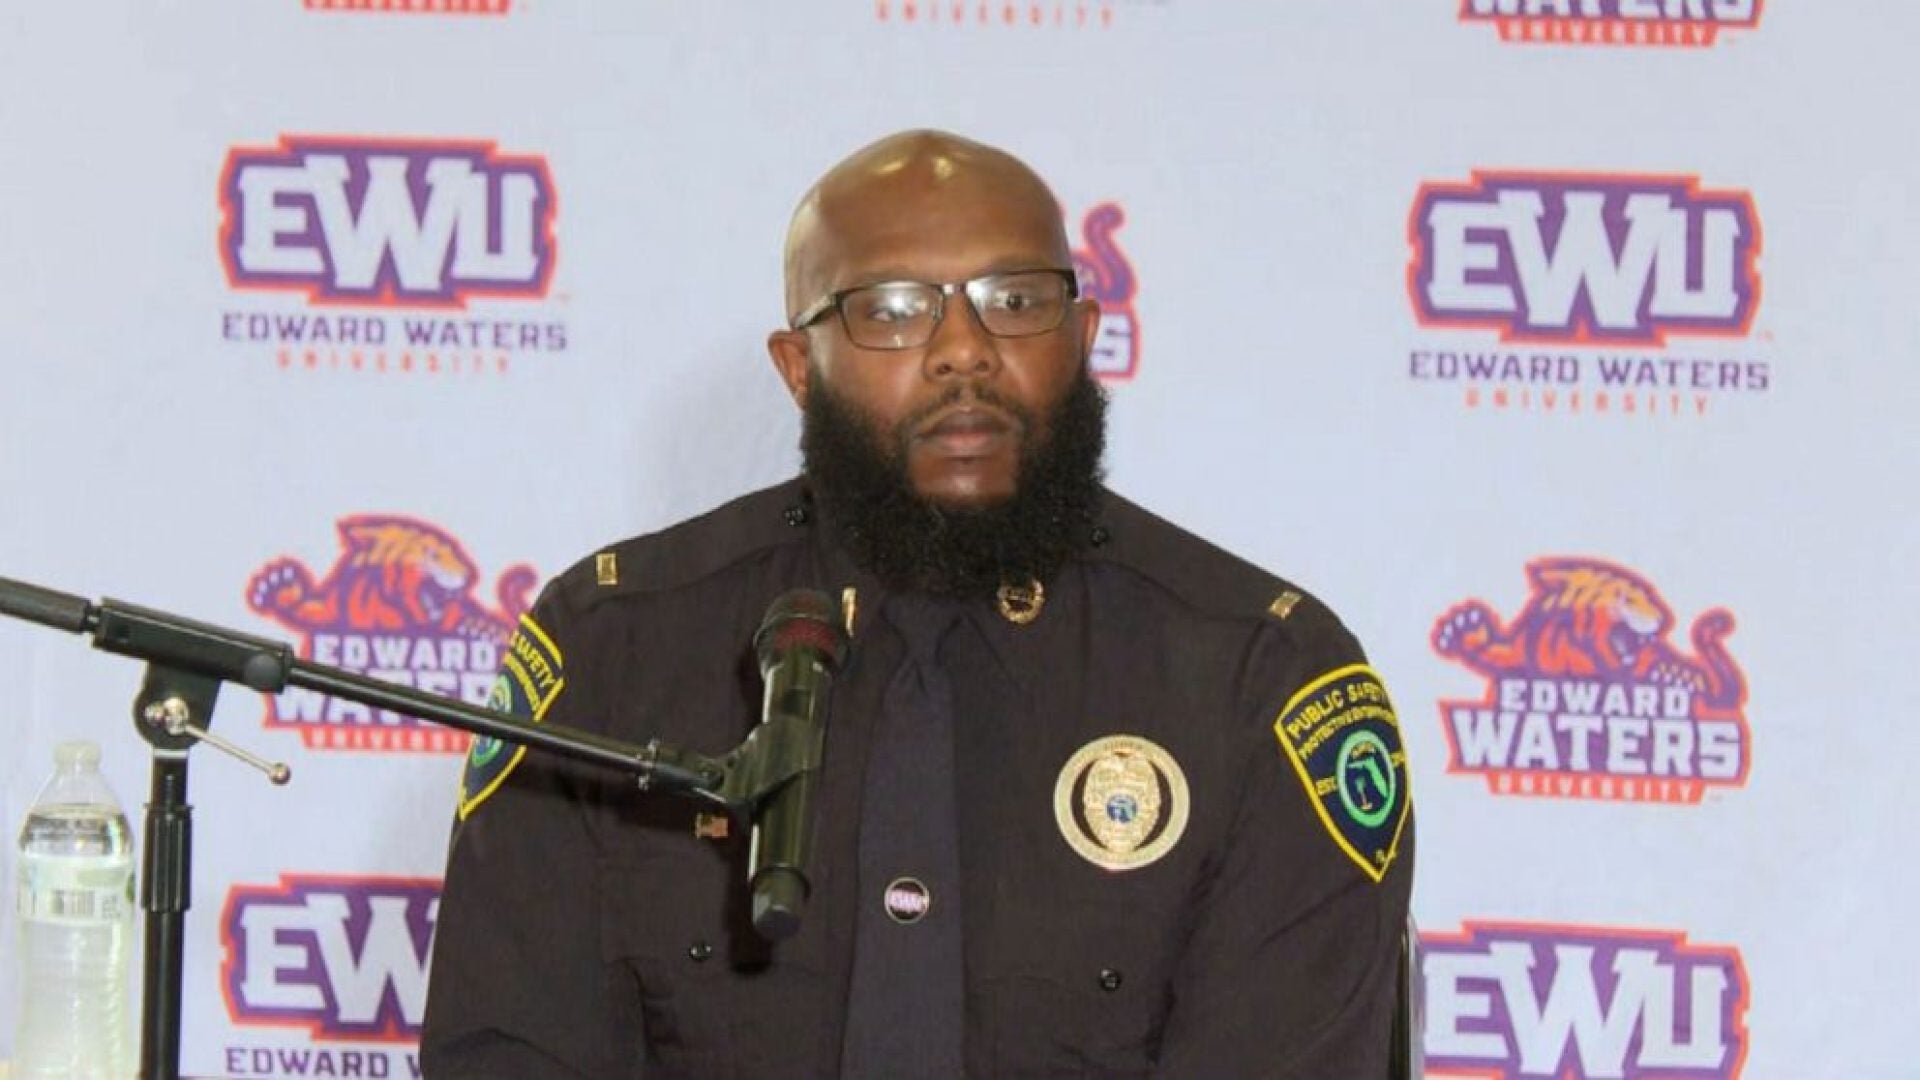 Security Officer Being Hailed A Hero For Preventing Attack On HCBU Campus By Suspect In Racist Jacksonville Shooting